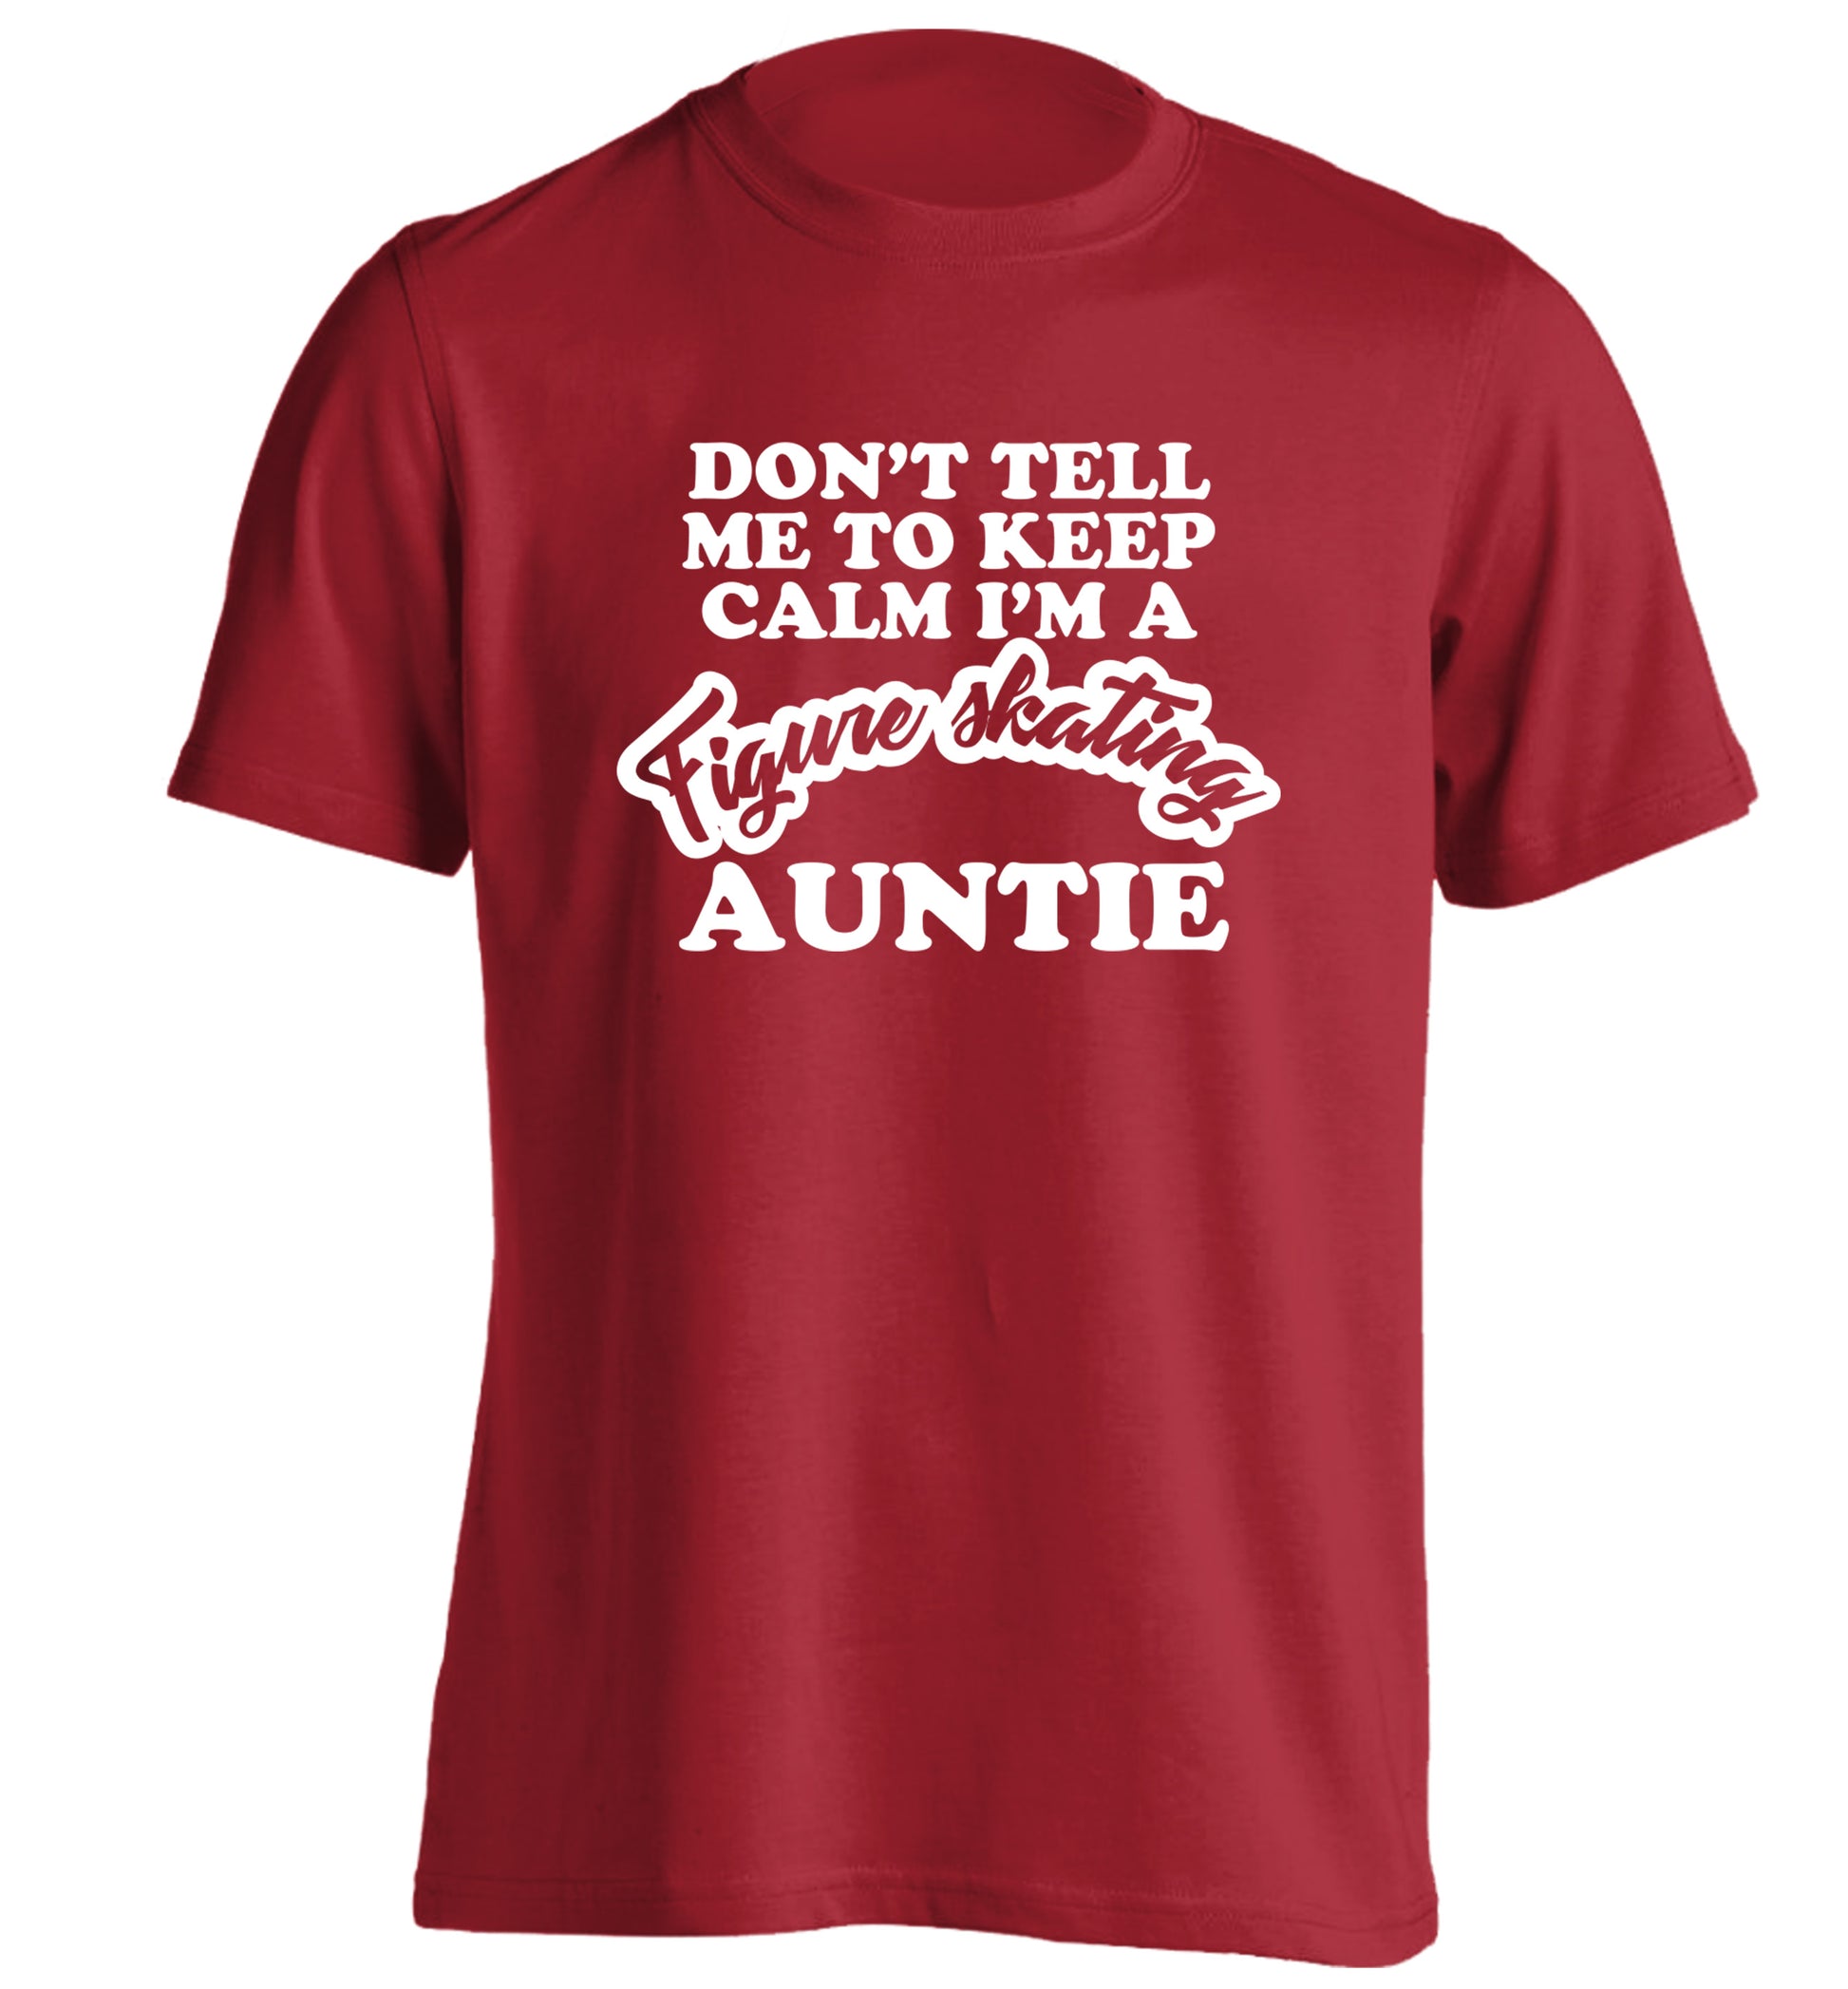 Don't tell me to keep calm I'm a figure skating auntie adults unisexred Tshirt 2XL